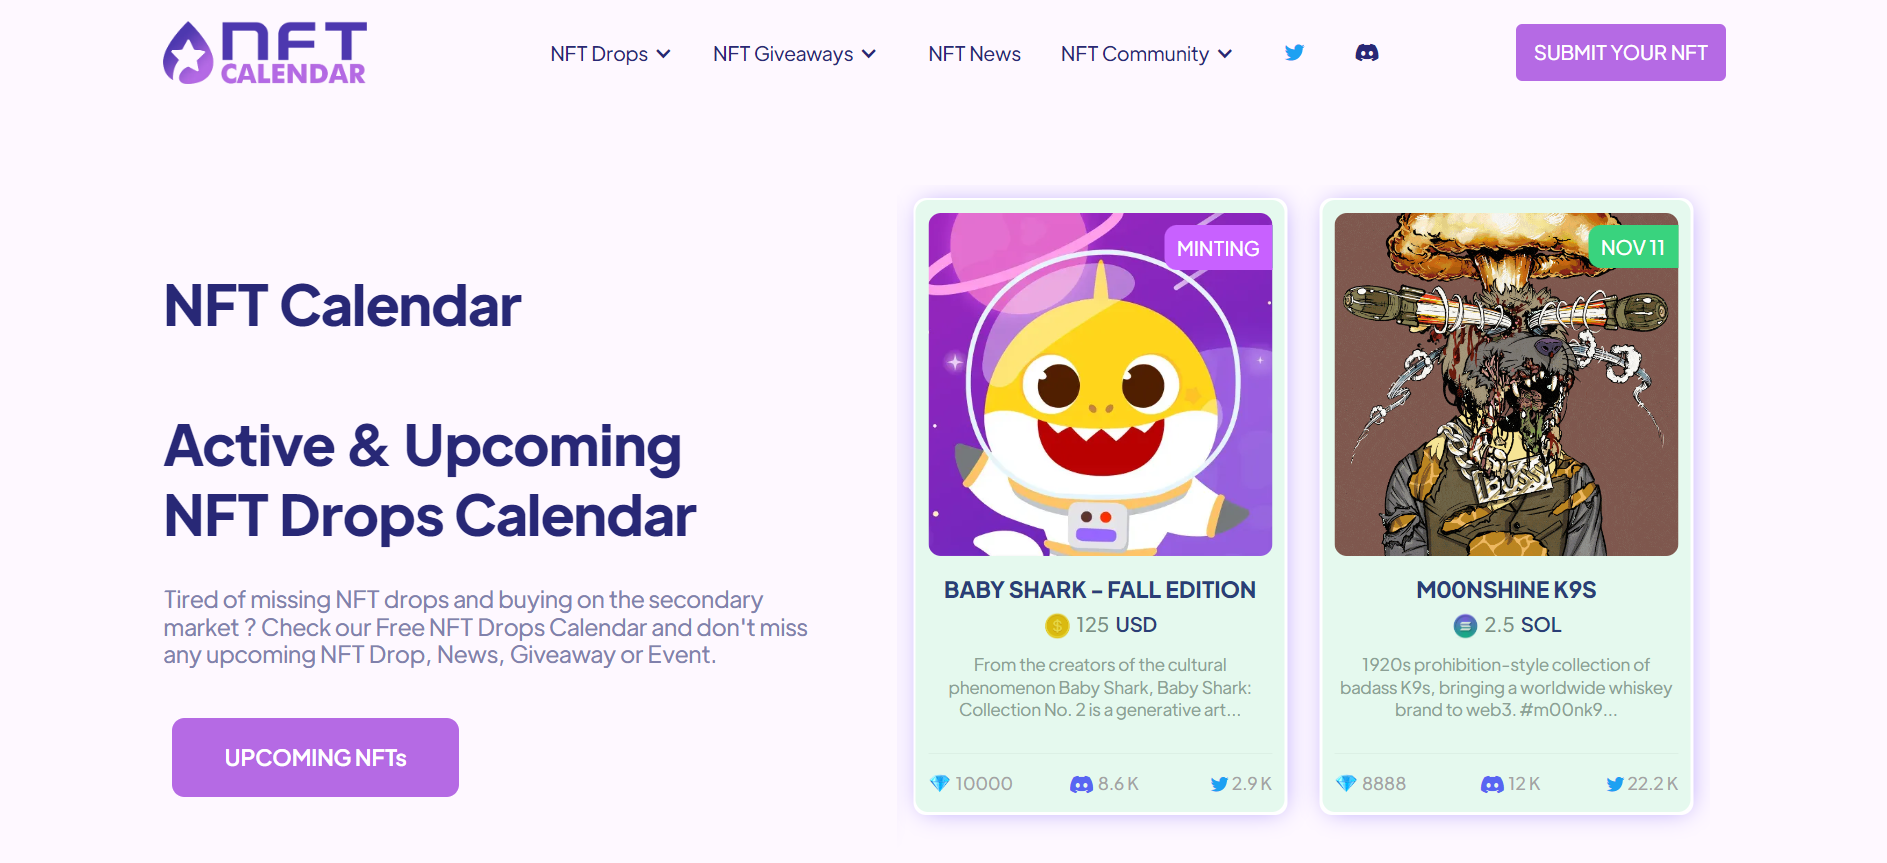 NFT Drops Calendar - How To Find Upcoming NFT Projects